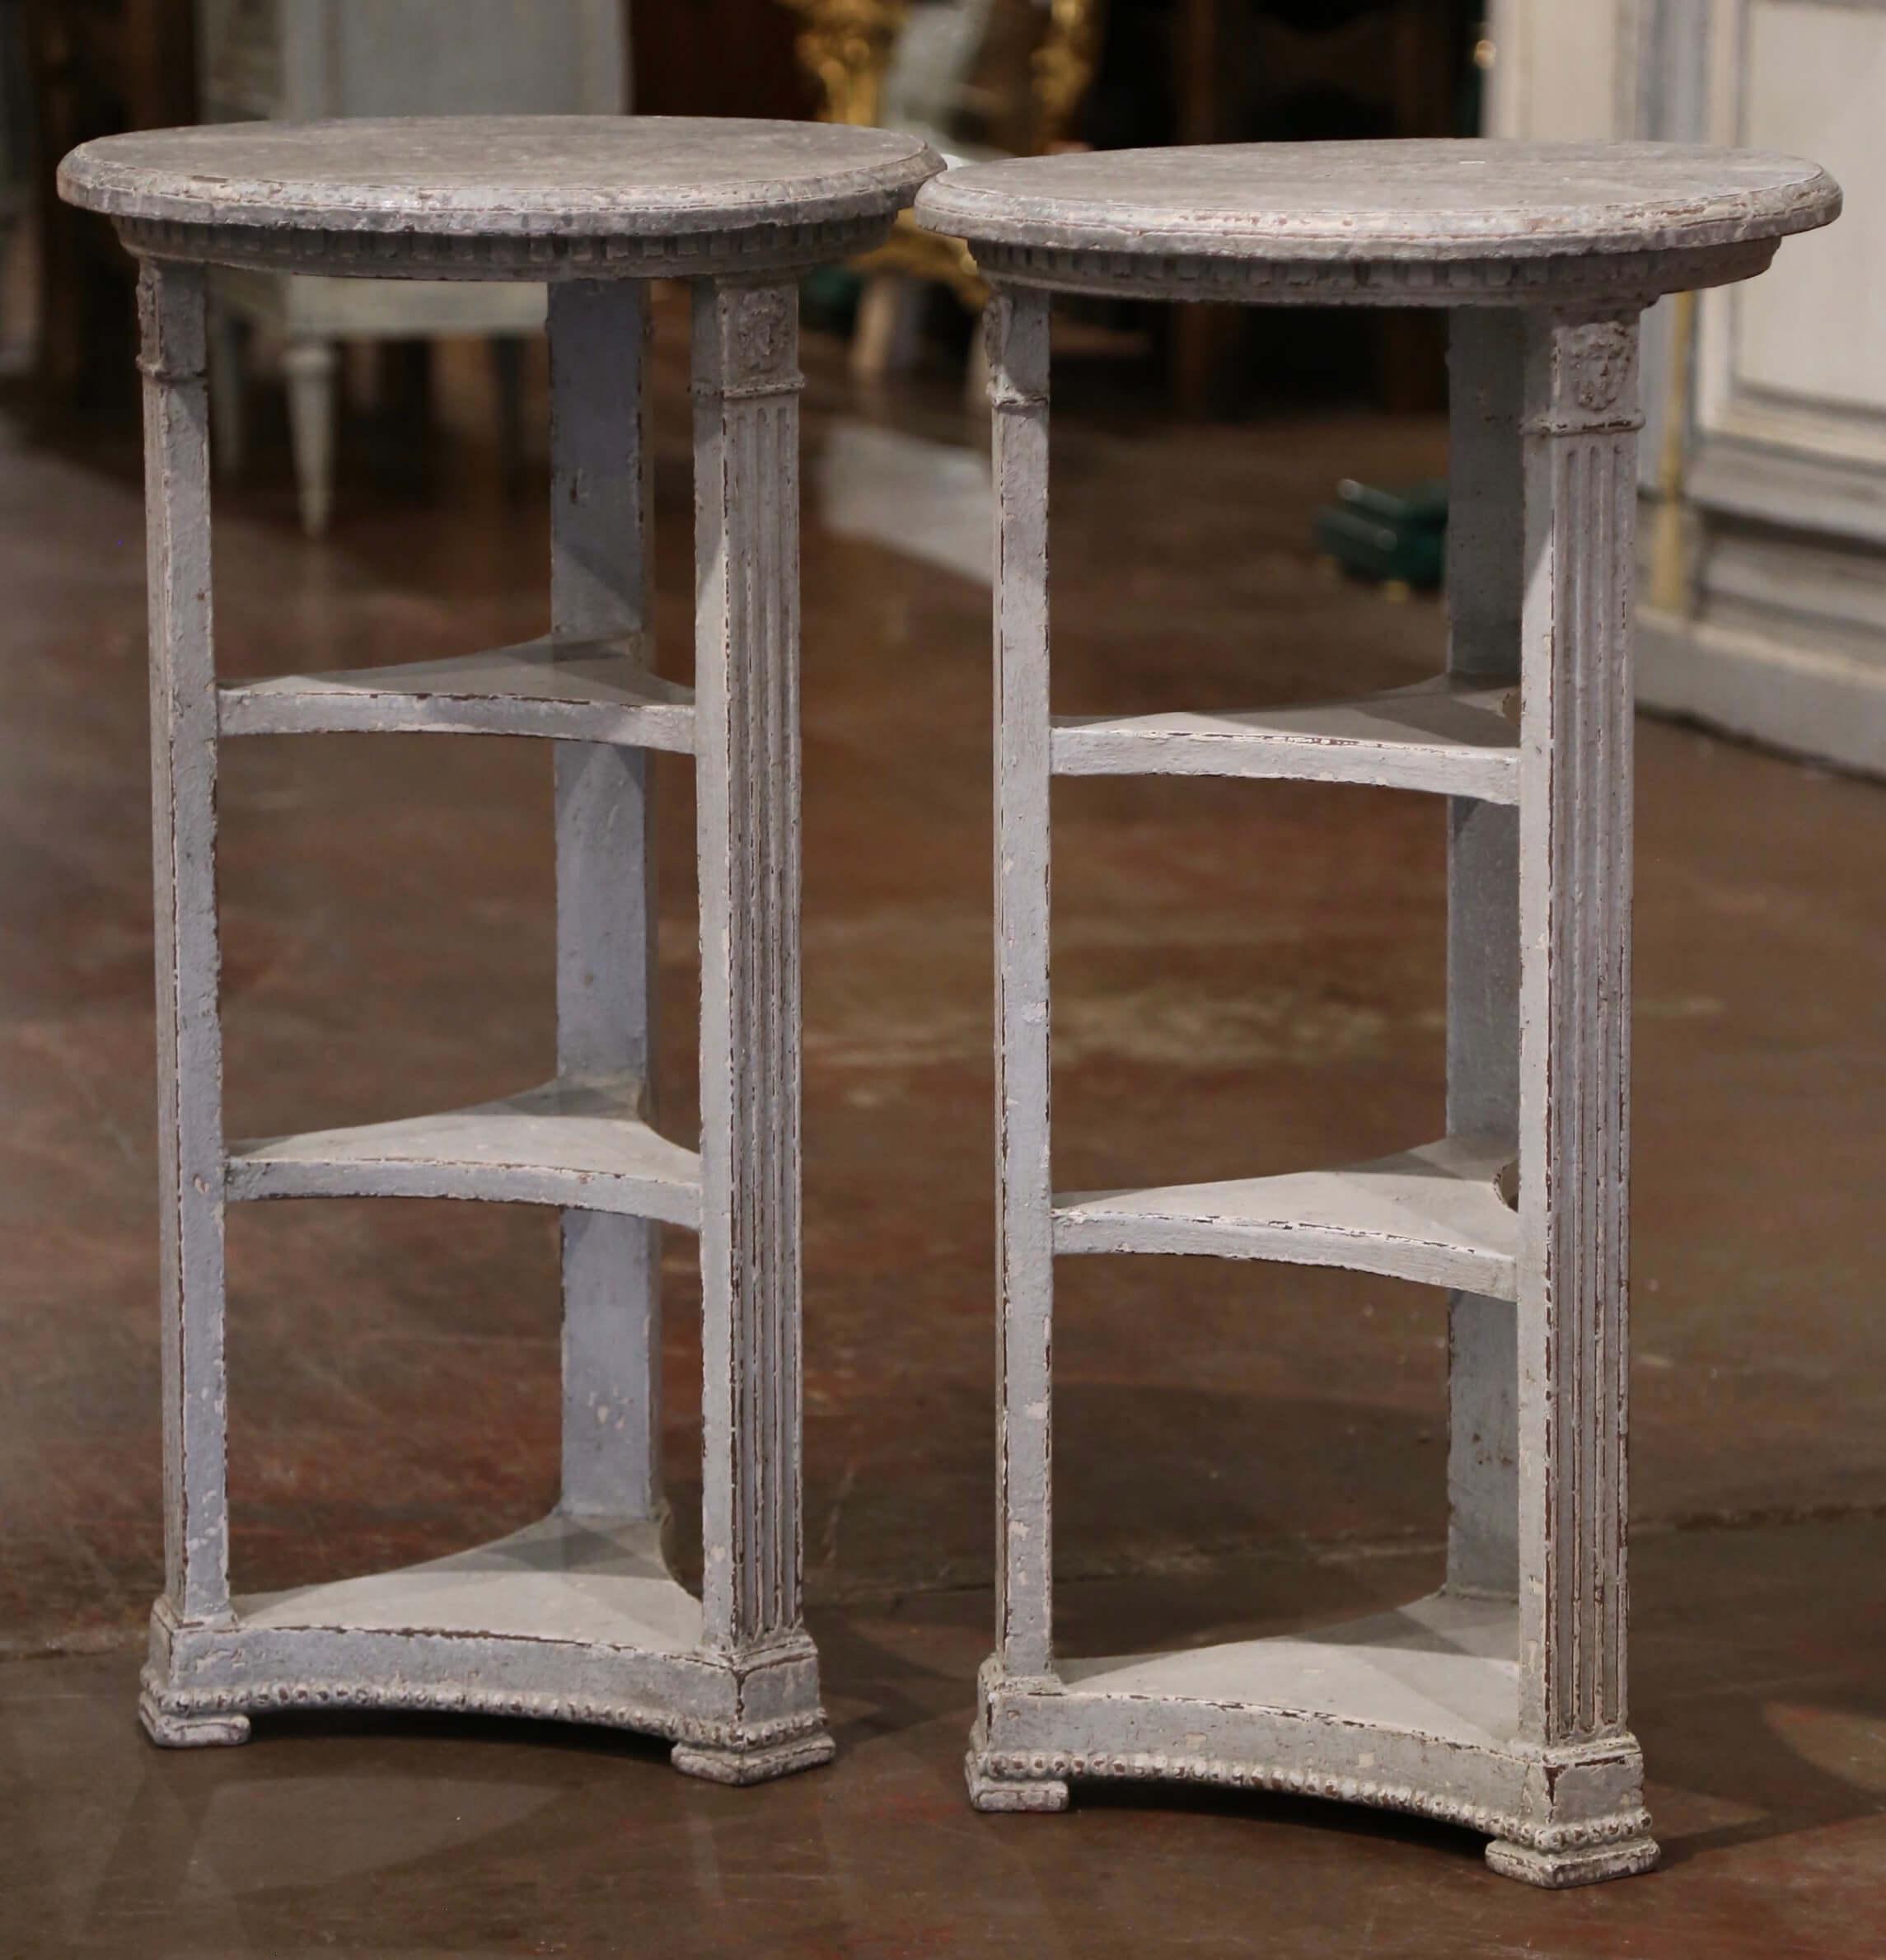 These elegant antique side tables were created in France, circa 1880. Each occasional table stands on three hand carved spline legs embellished with carved female head medallions at the shoulder and connected with triple tier shelves. The top is